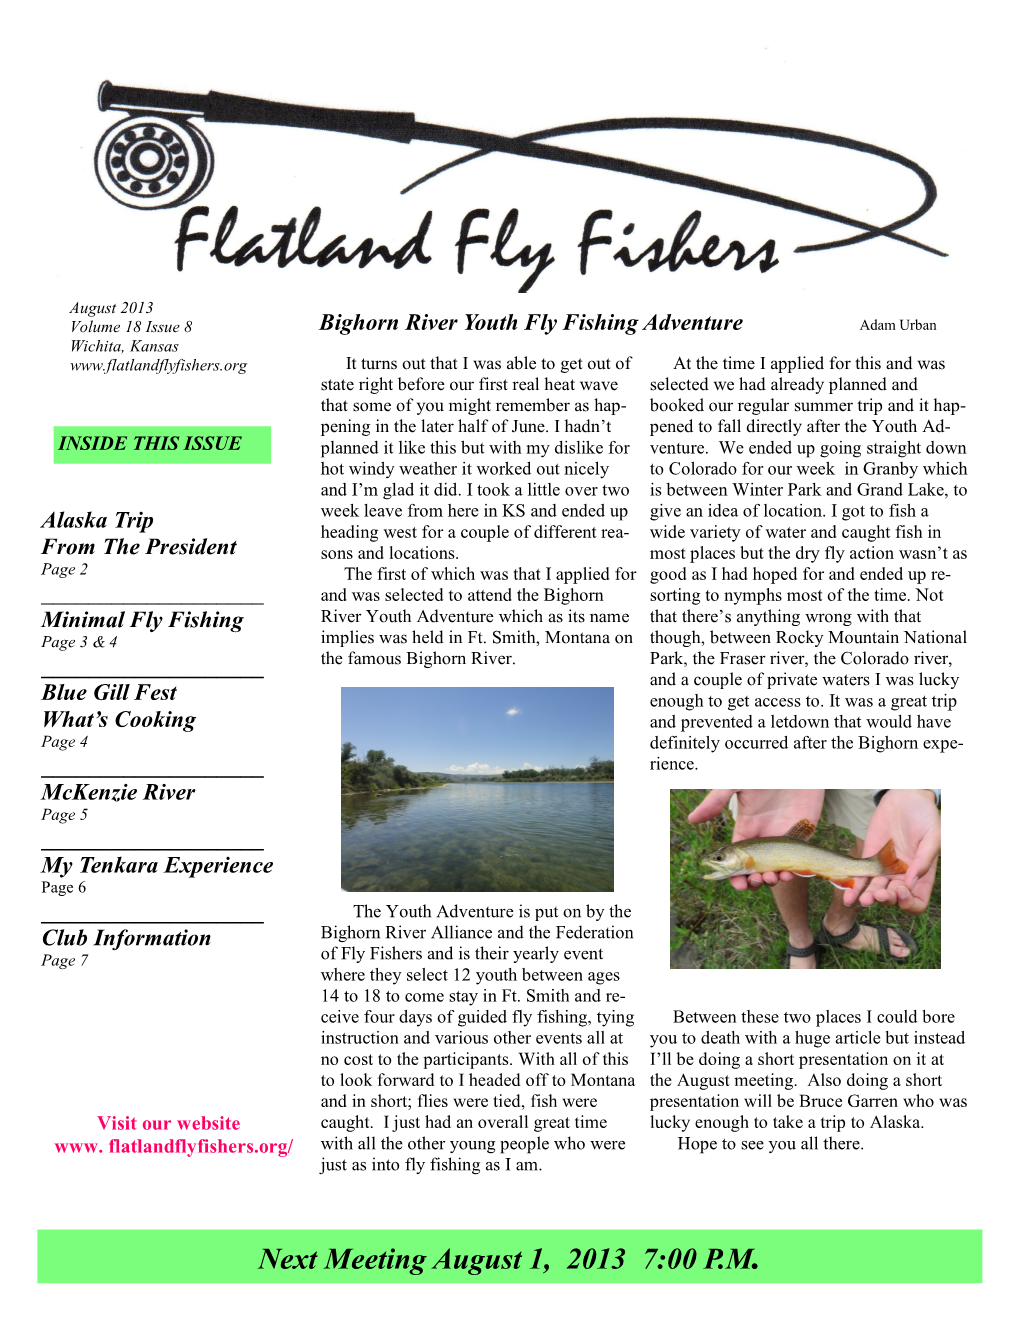 Next Meeting August 1, 2013 7:00 P.M. Flatland Fly Fishers 2